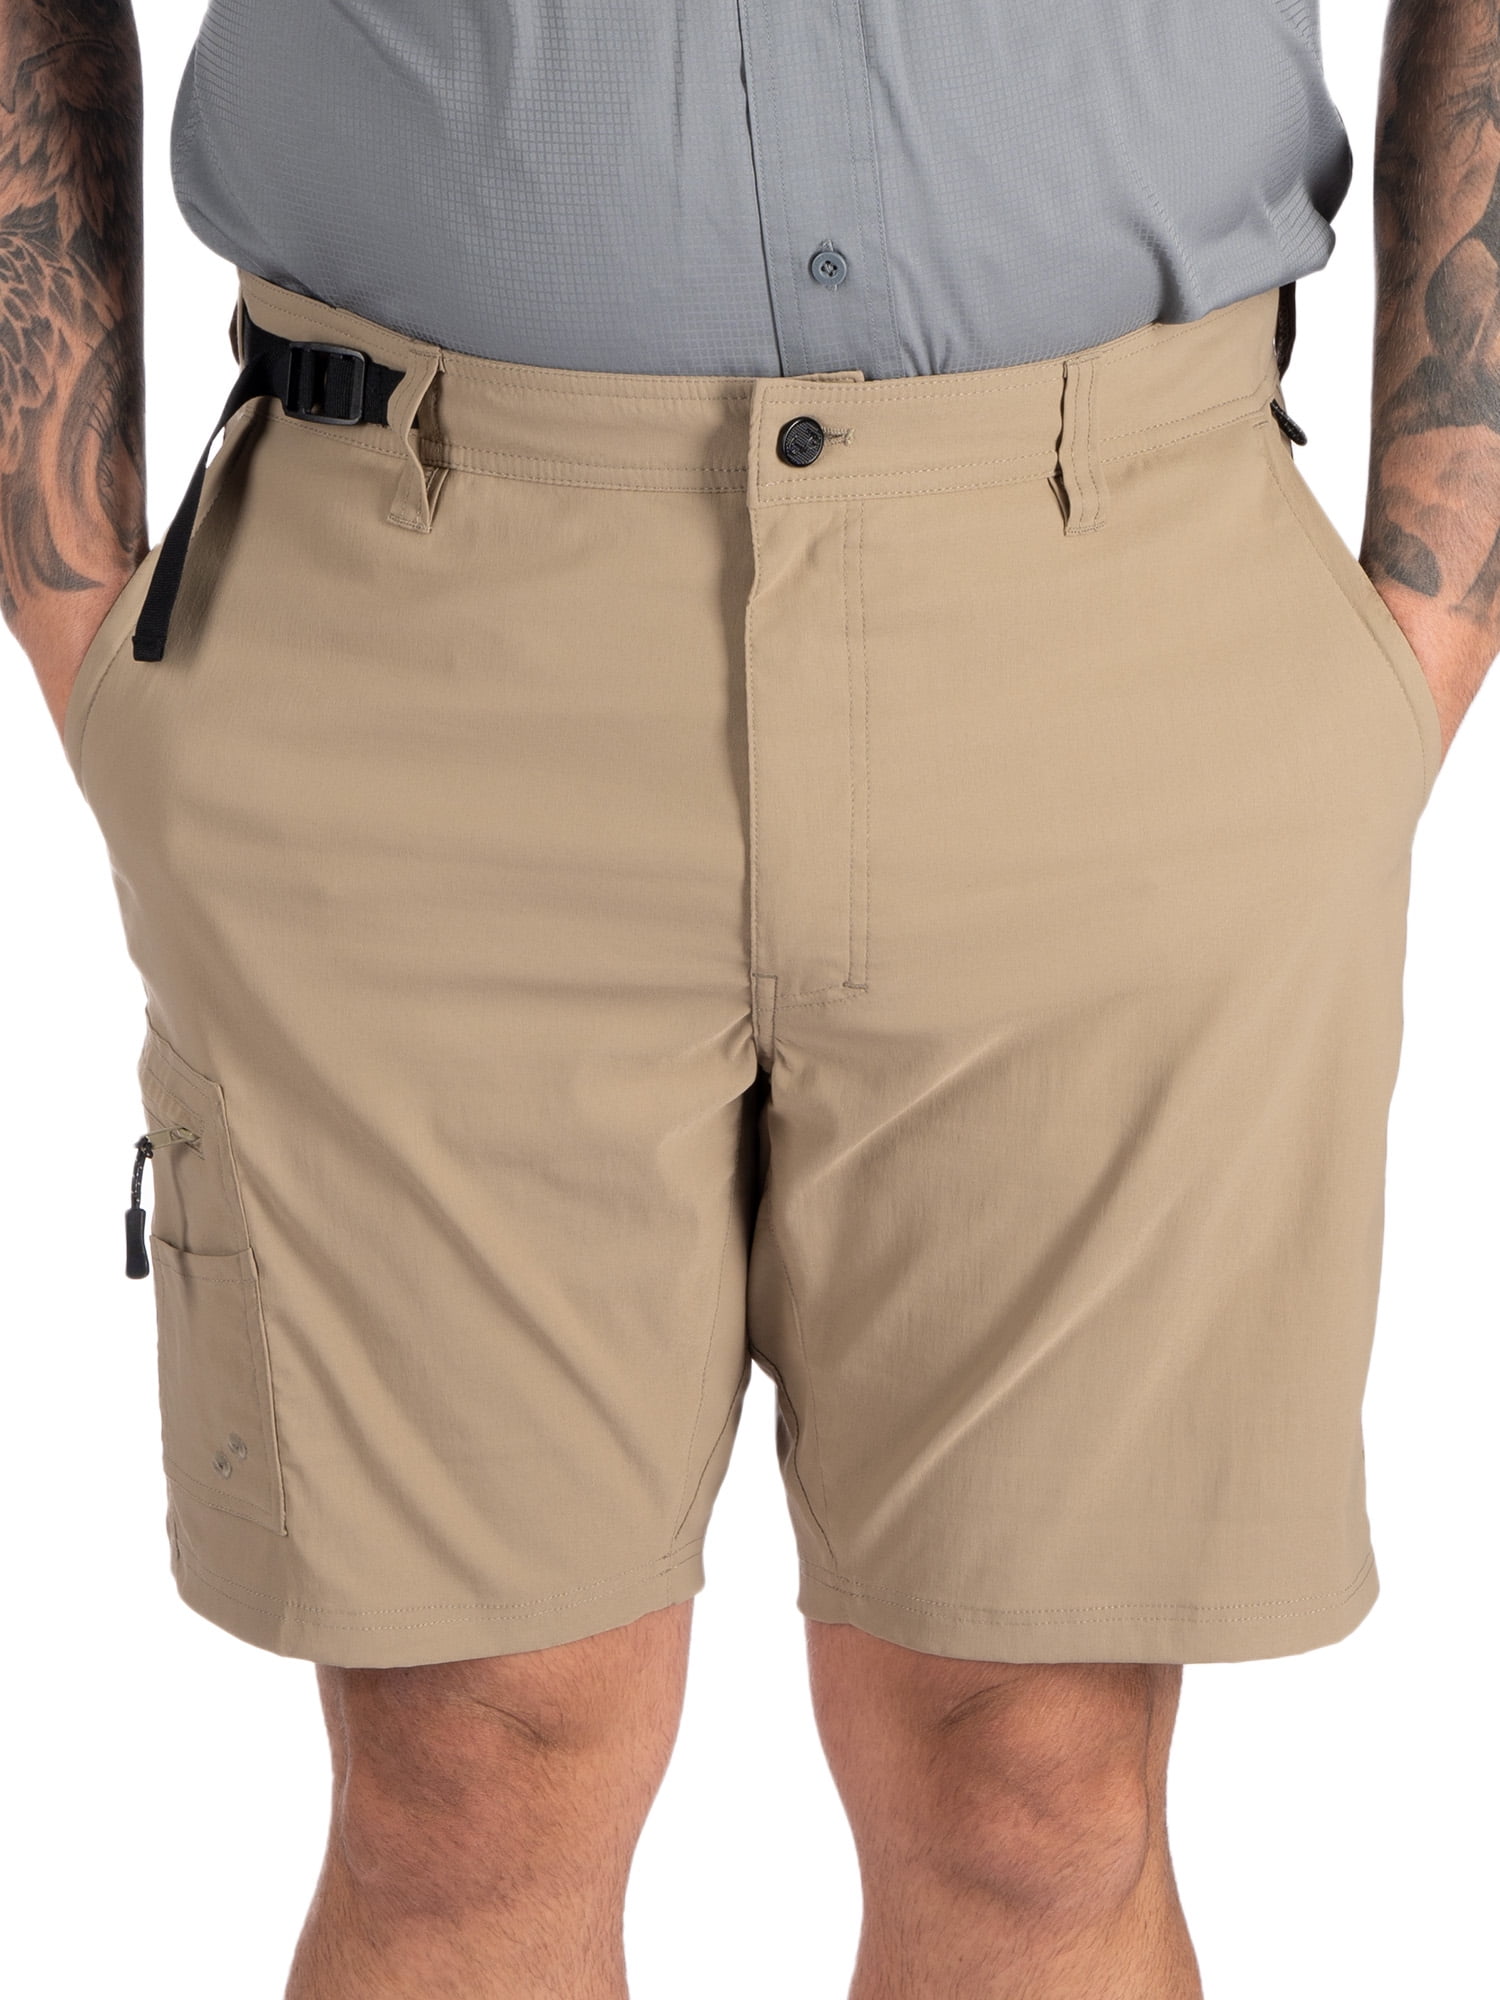 Realtree Men's Hybrid Fishing Shorts, Athletic Performance Short Pants in Stone Tan, Sizes S-3xl, Size: Large, Beige